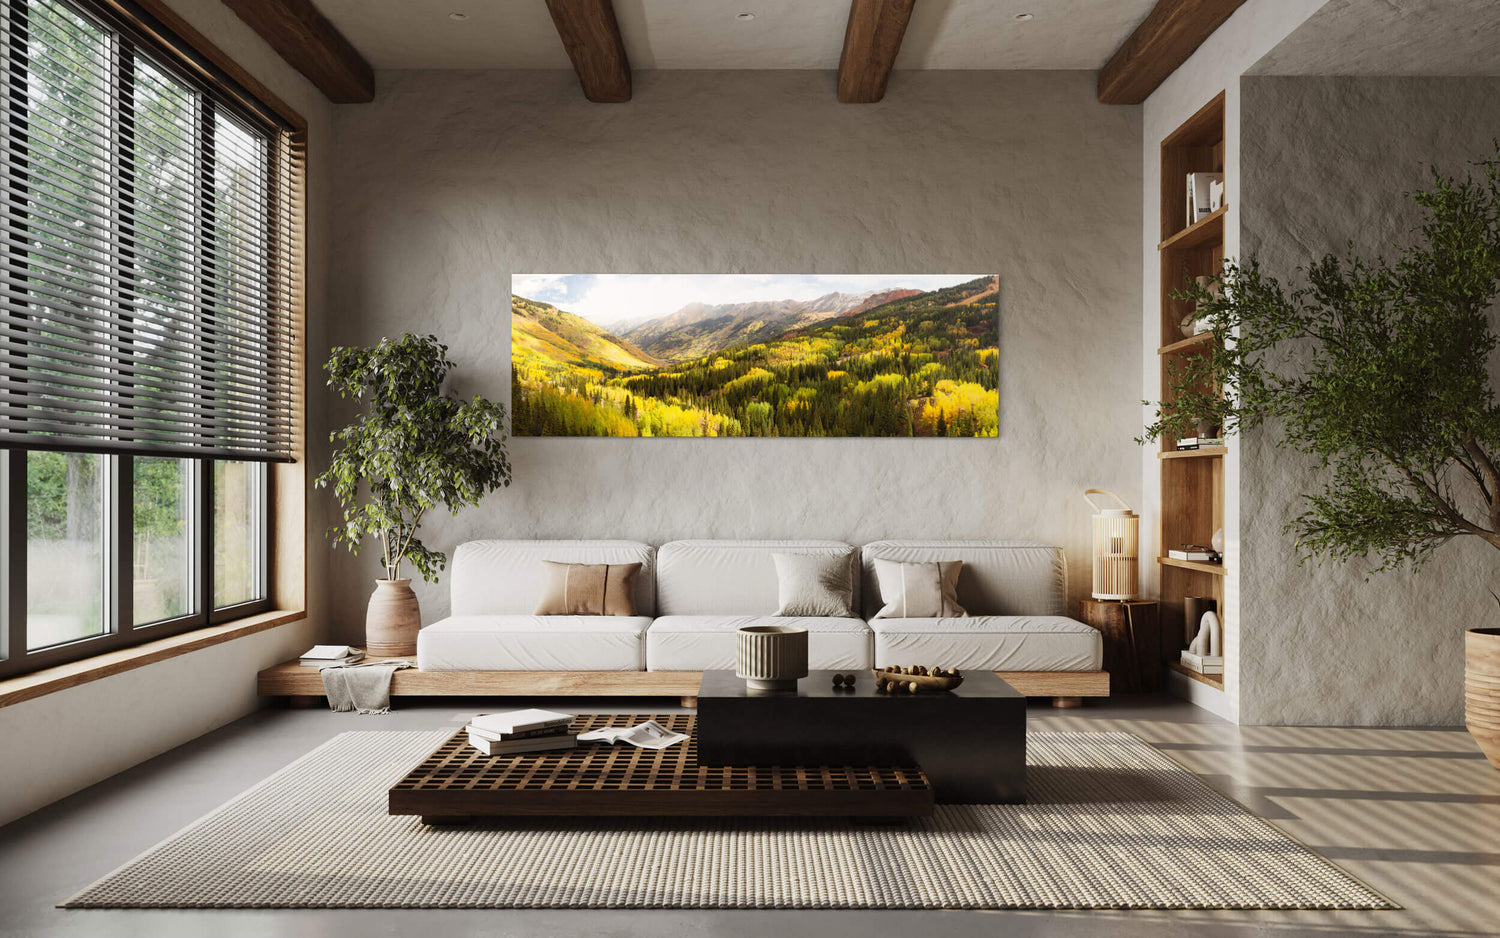 A piece of Colorado art showing the Million Dollar Highway fall colors hangs in a living room.